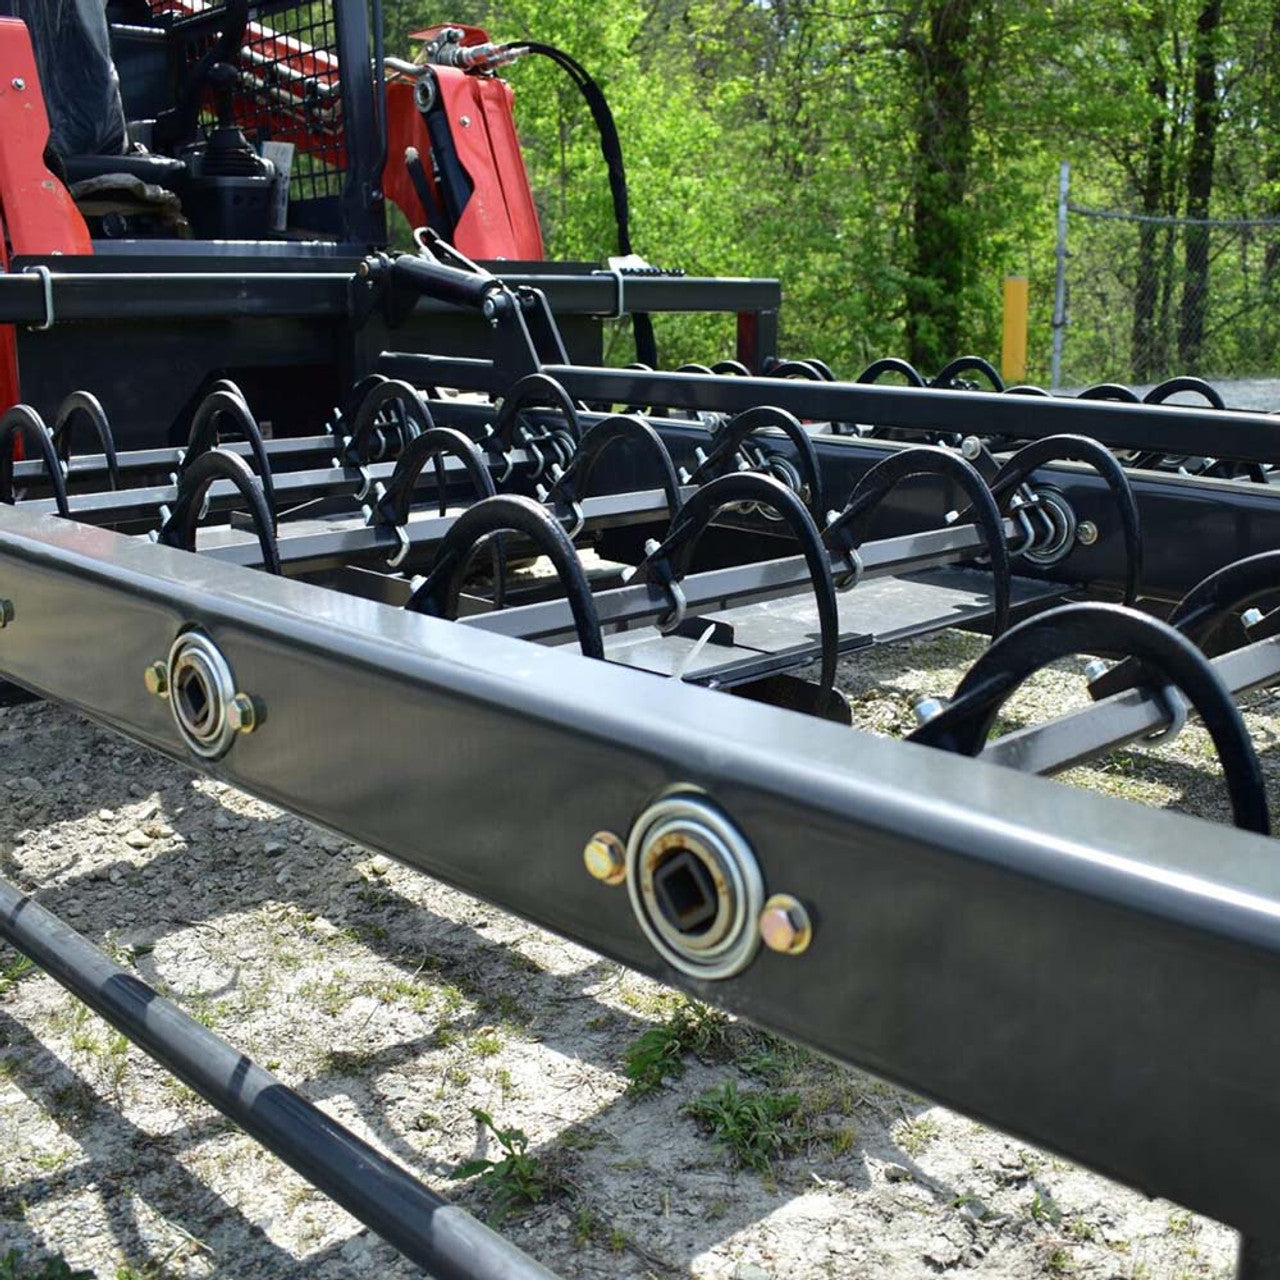 CID HAY ACCUMULATOR GRAPPLE WITH STACK BLADES FOR SKID STEER